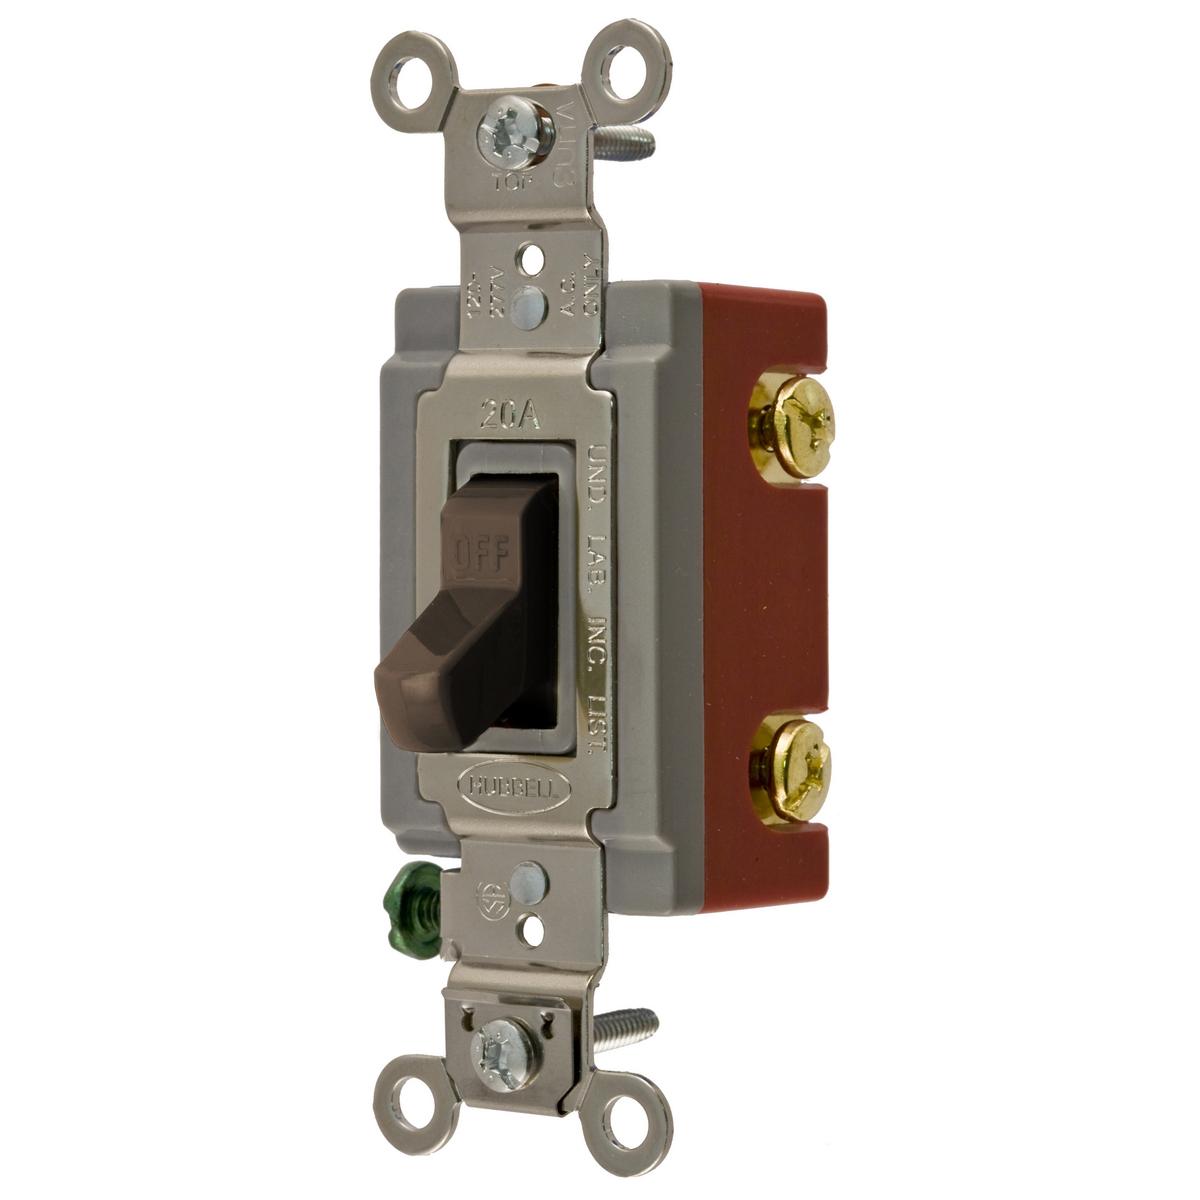 Hubbell HBL1222 Switches and Lighting Controls, Extra Heavy Duty Industrial Grade, Toggle Switches, General Purpose AC, Double Pole, 20A 120/277V AC, Back and Side Wired, Brown Toggle  ; Large brass binding head screws with deep slots ; Abuse resistant nylon toggle ; Str